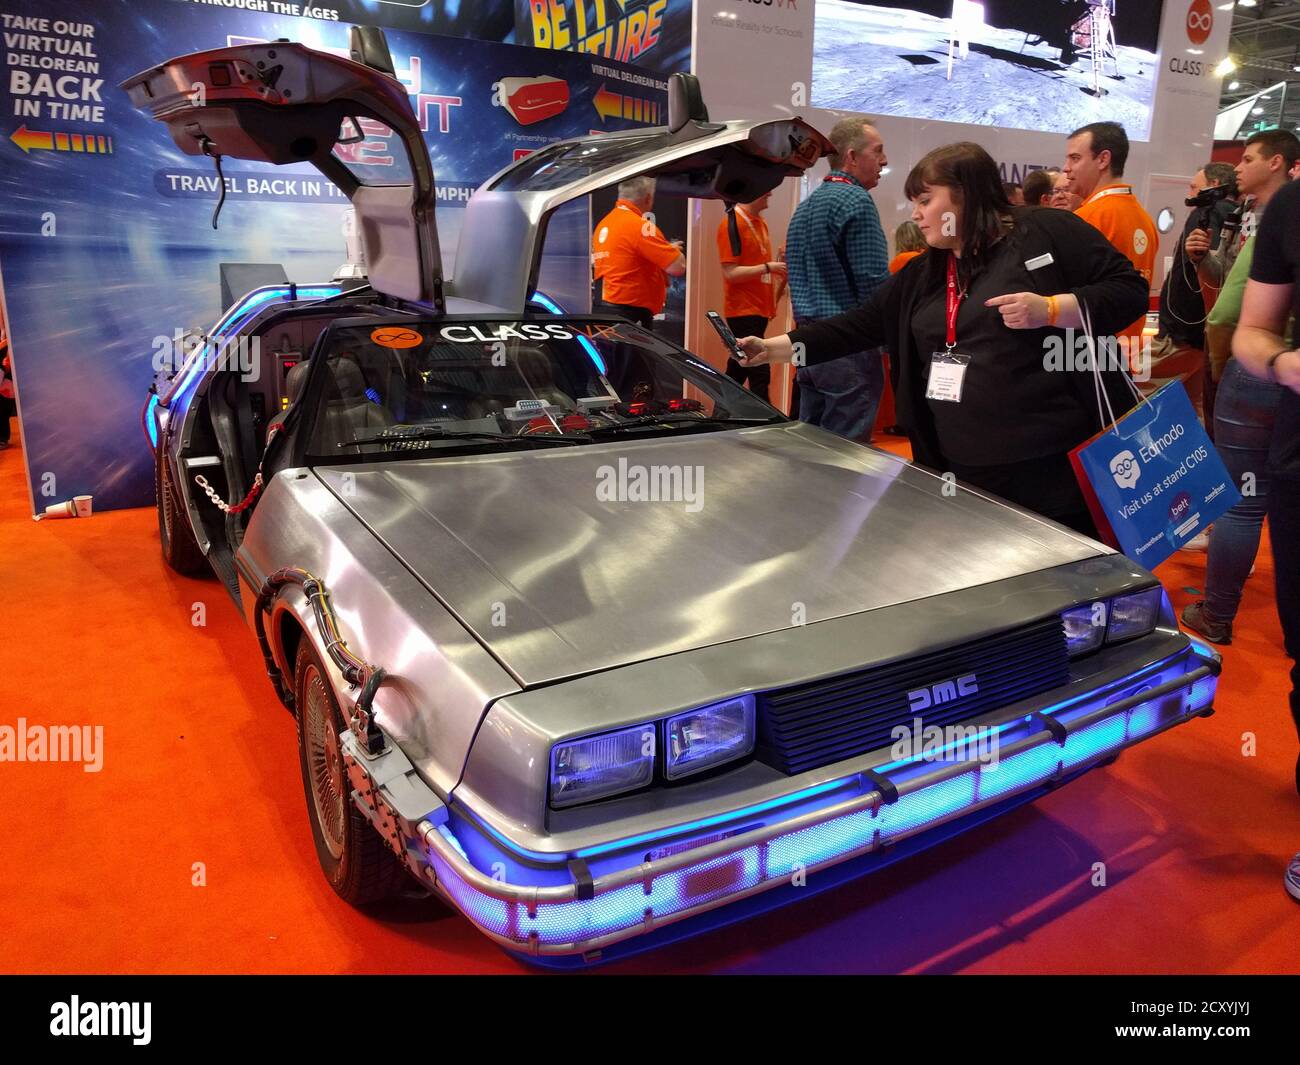 Original DeLorean Hero A  car time machine as used by Marty McFly and  Doc in Back to the Future film on a stand in a show Stock Photo